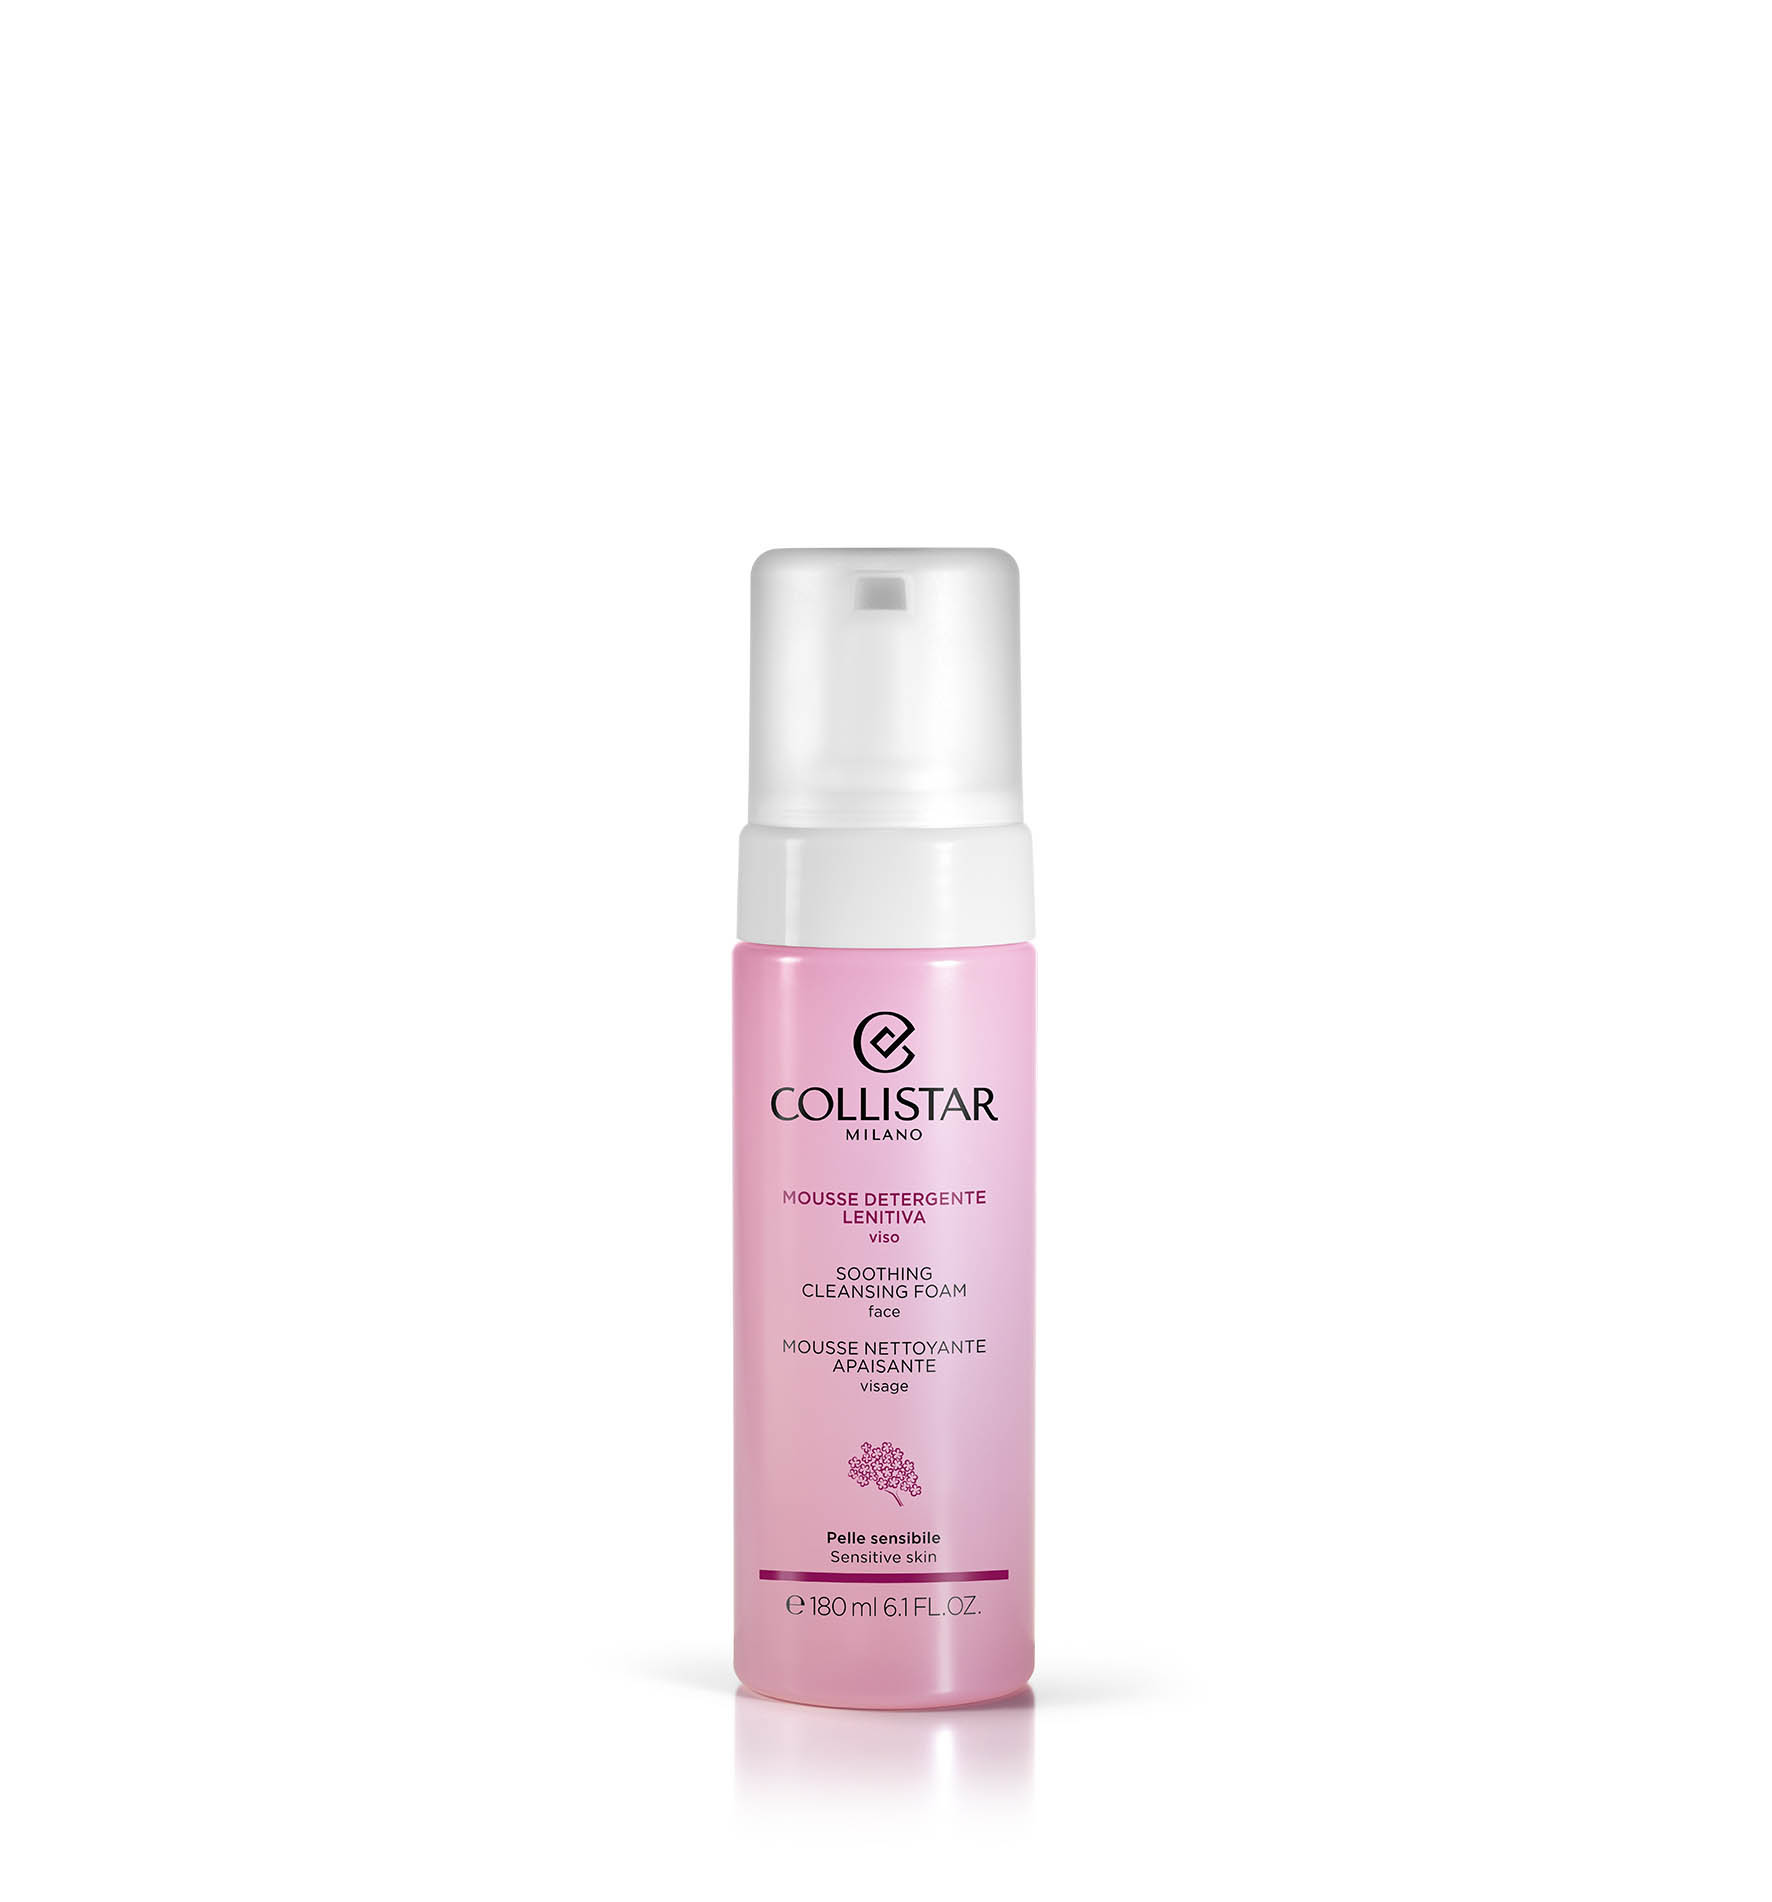 SOOTHING CLEANSING FOAM FACE - Dark spots | Collistar - Shop Online Ufficiale